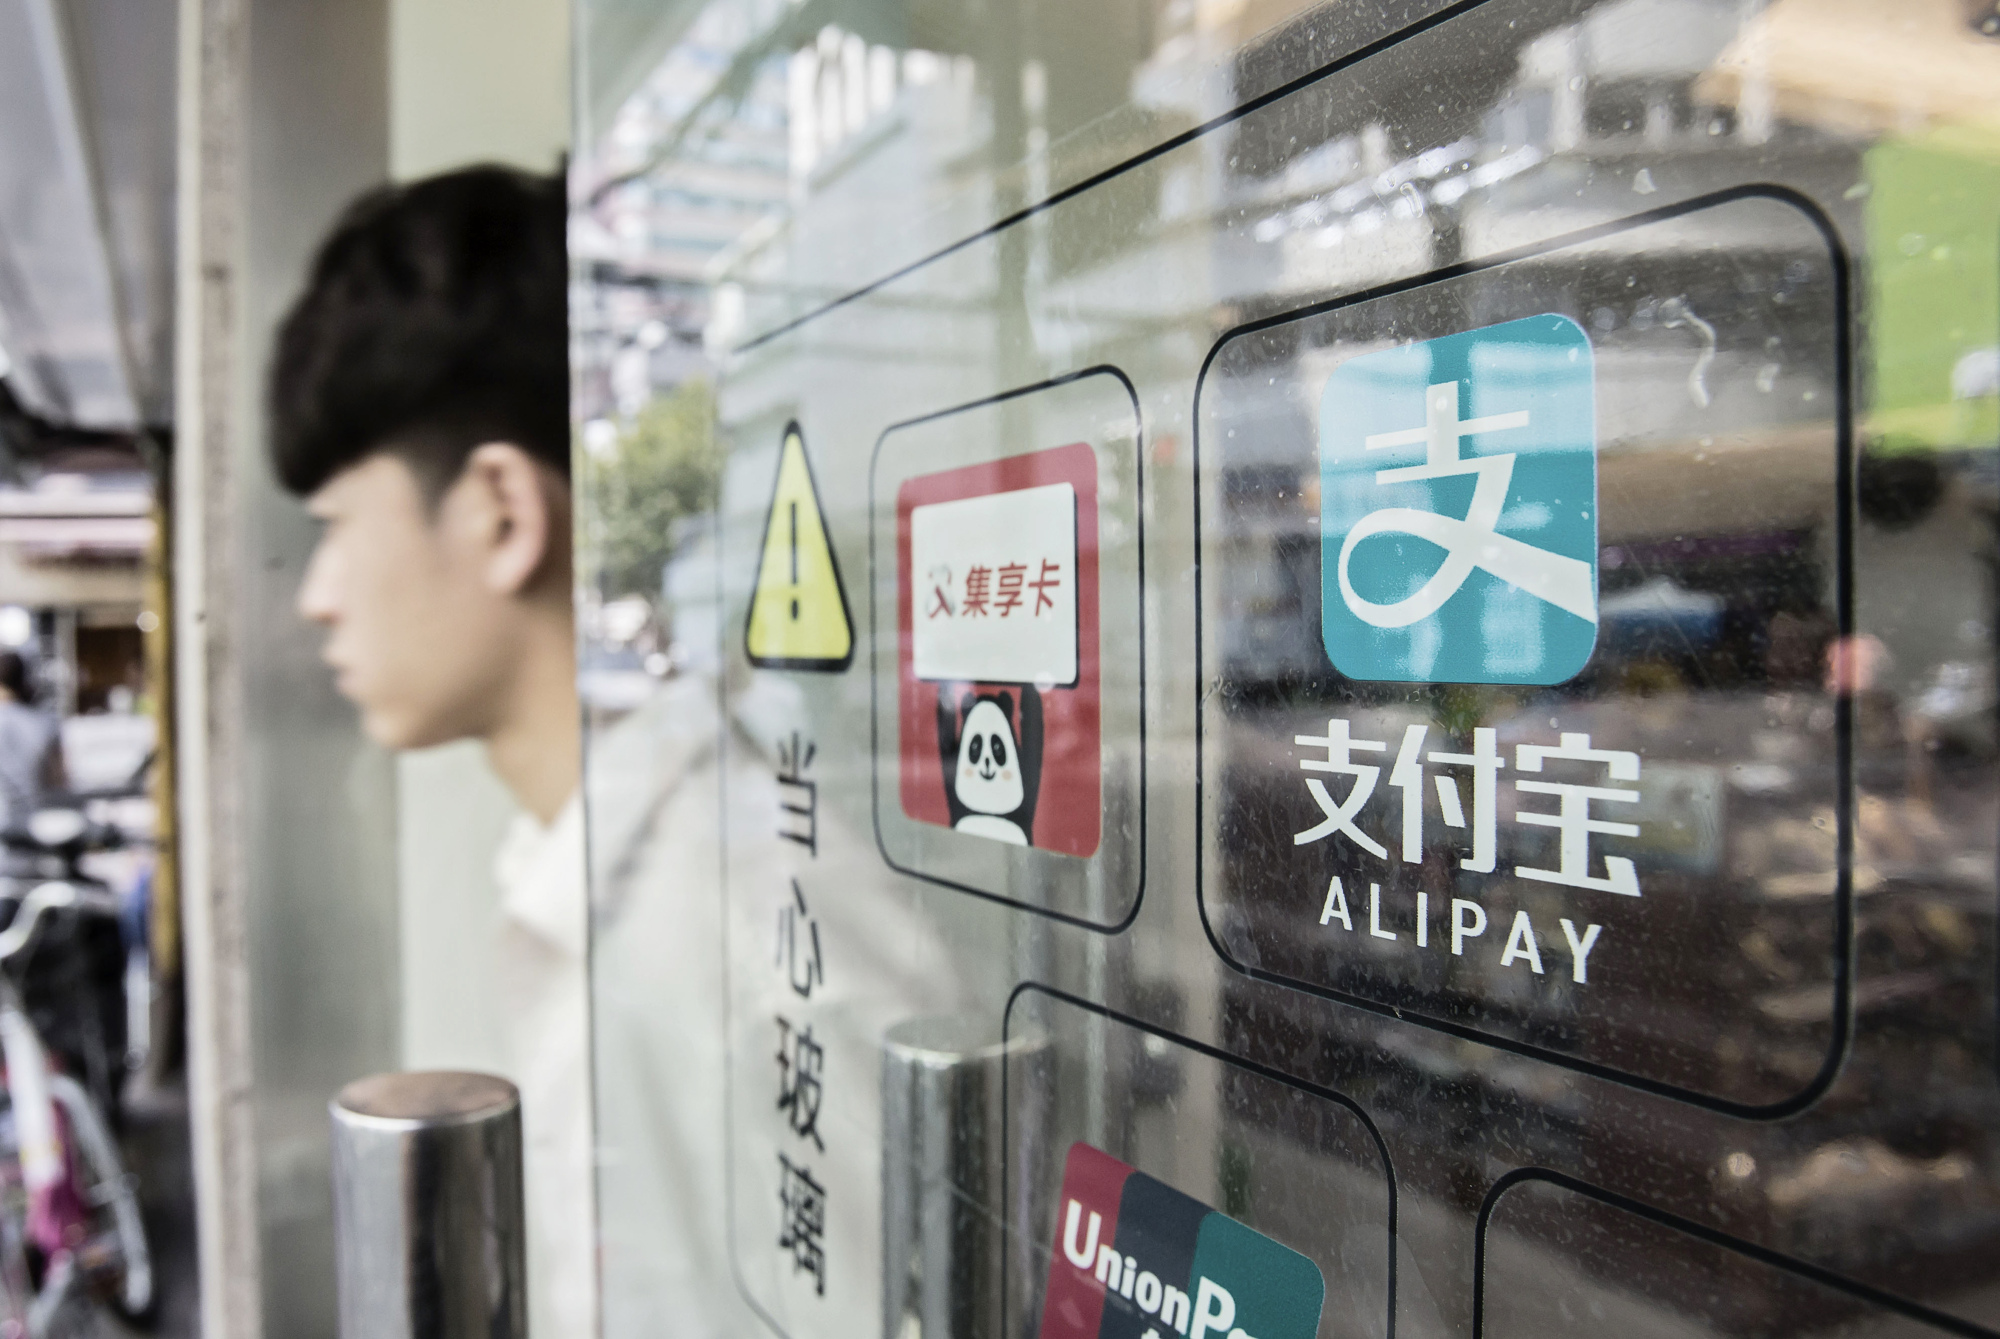 Ant Financial Services Group's Alipay payment system.